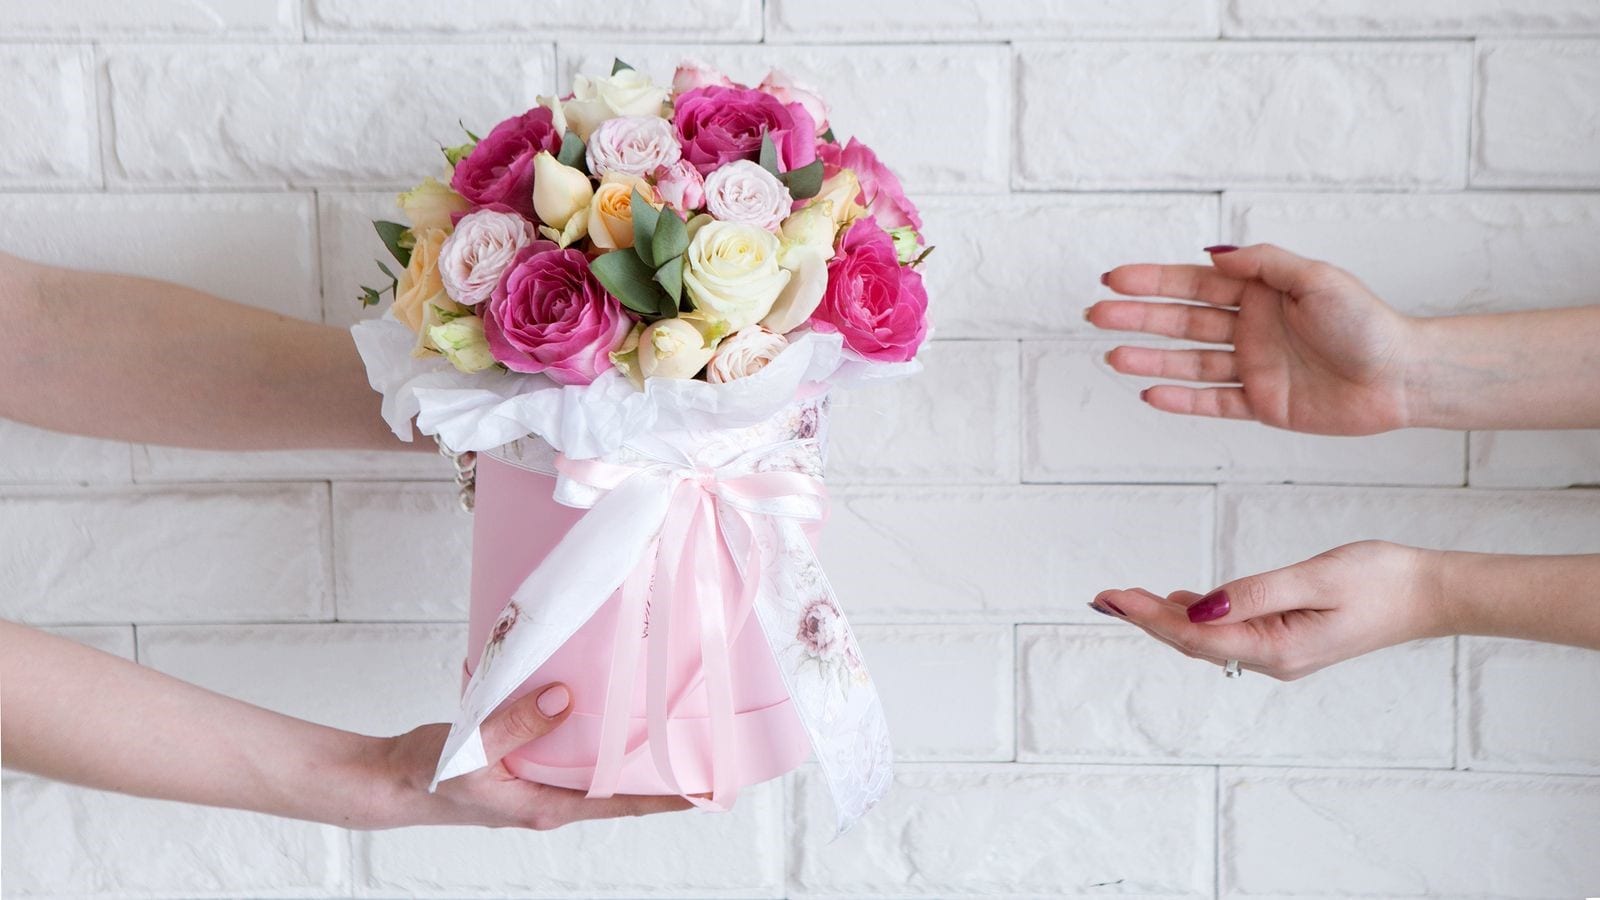 Does a bouquet of blossoms make a perfect birthday present?